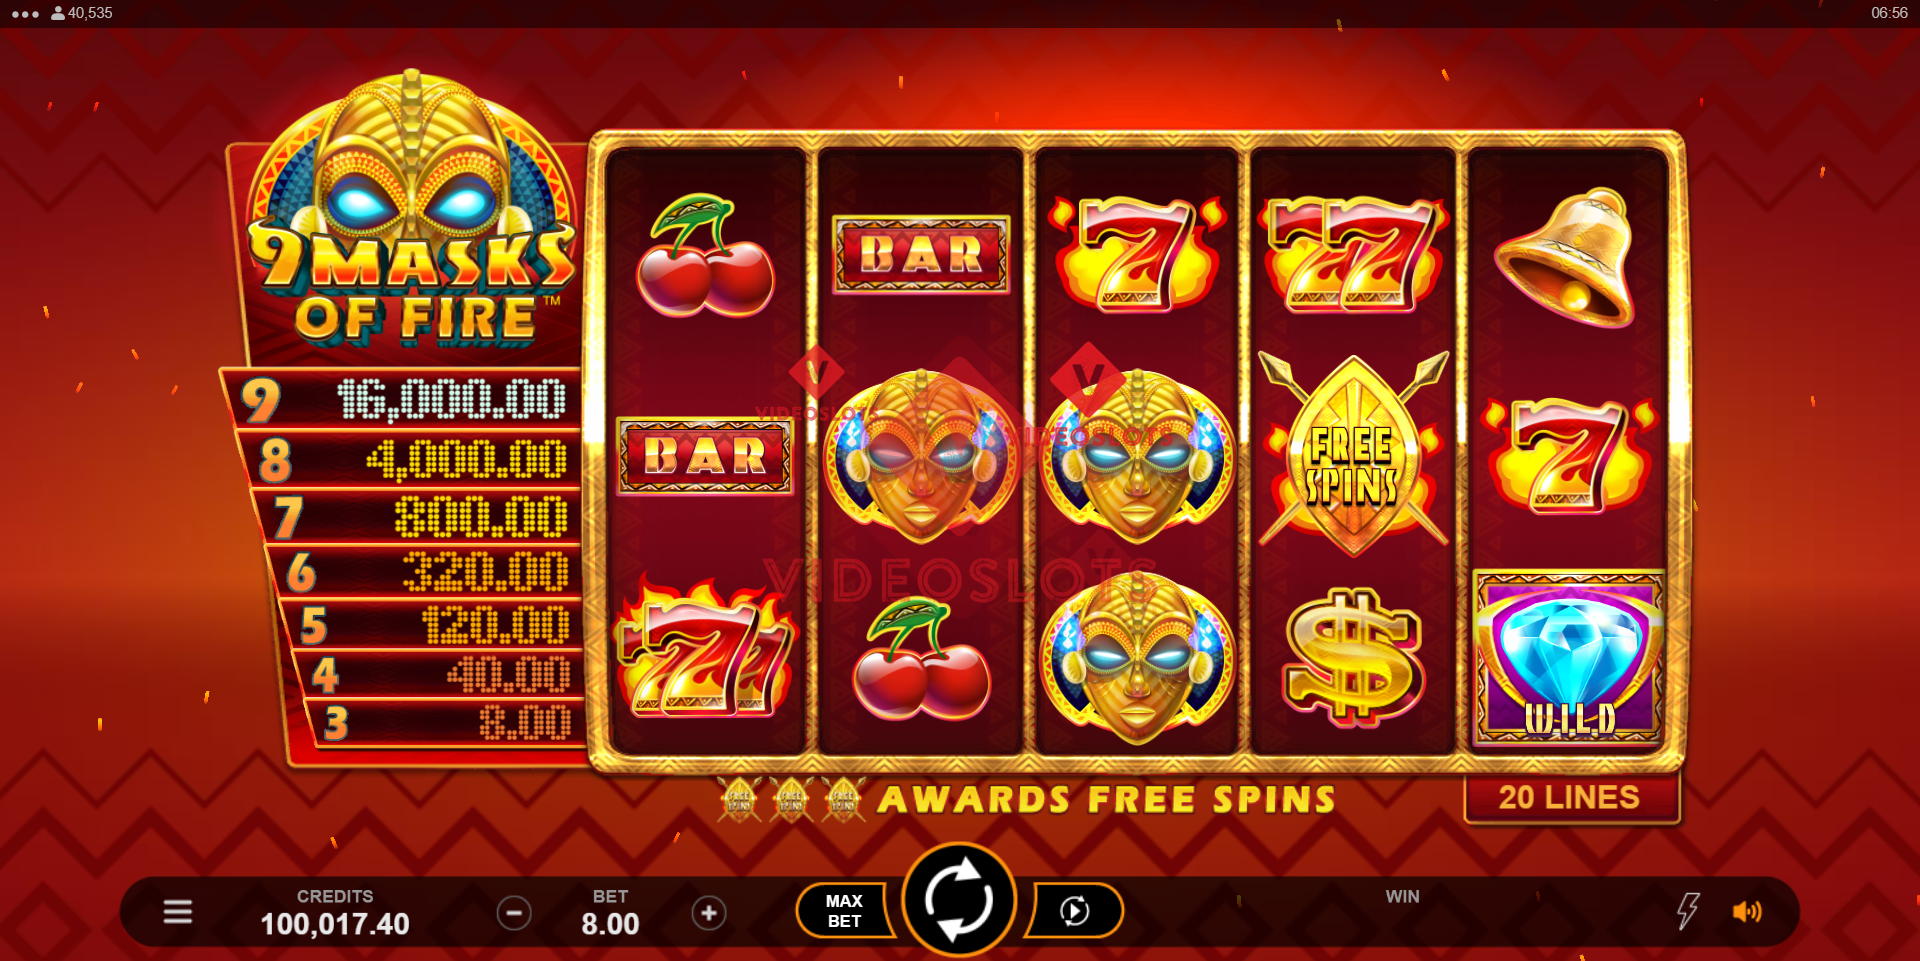 Base Game for 9 Masks of Fire slot for Microgaming